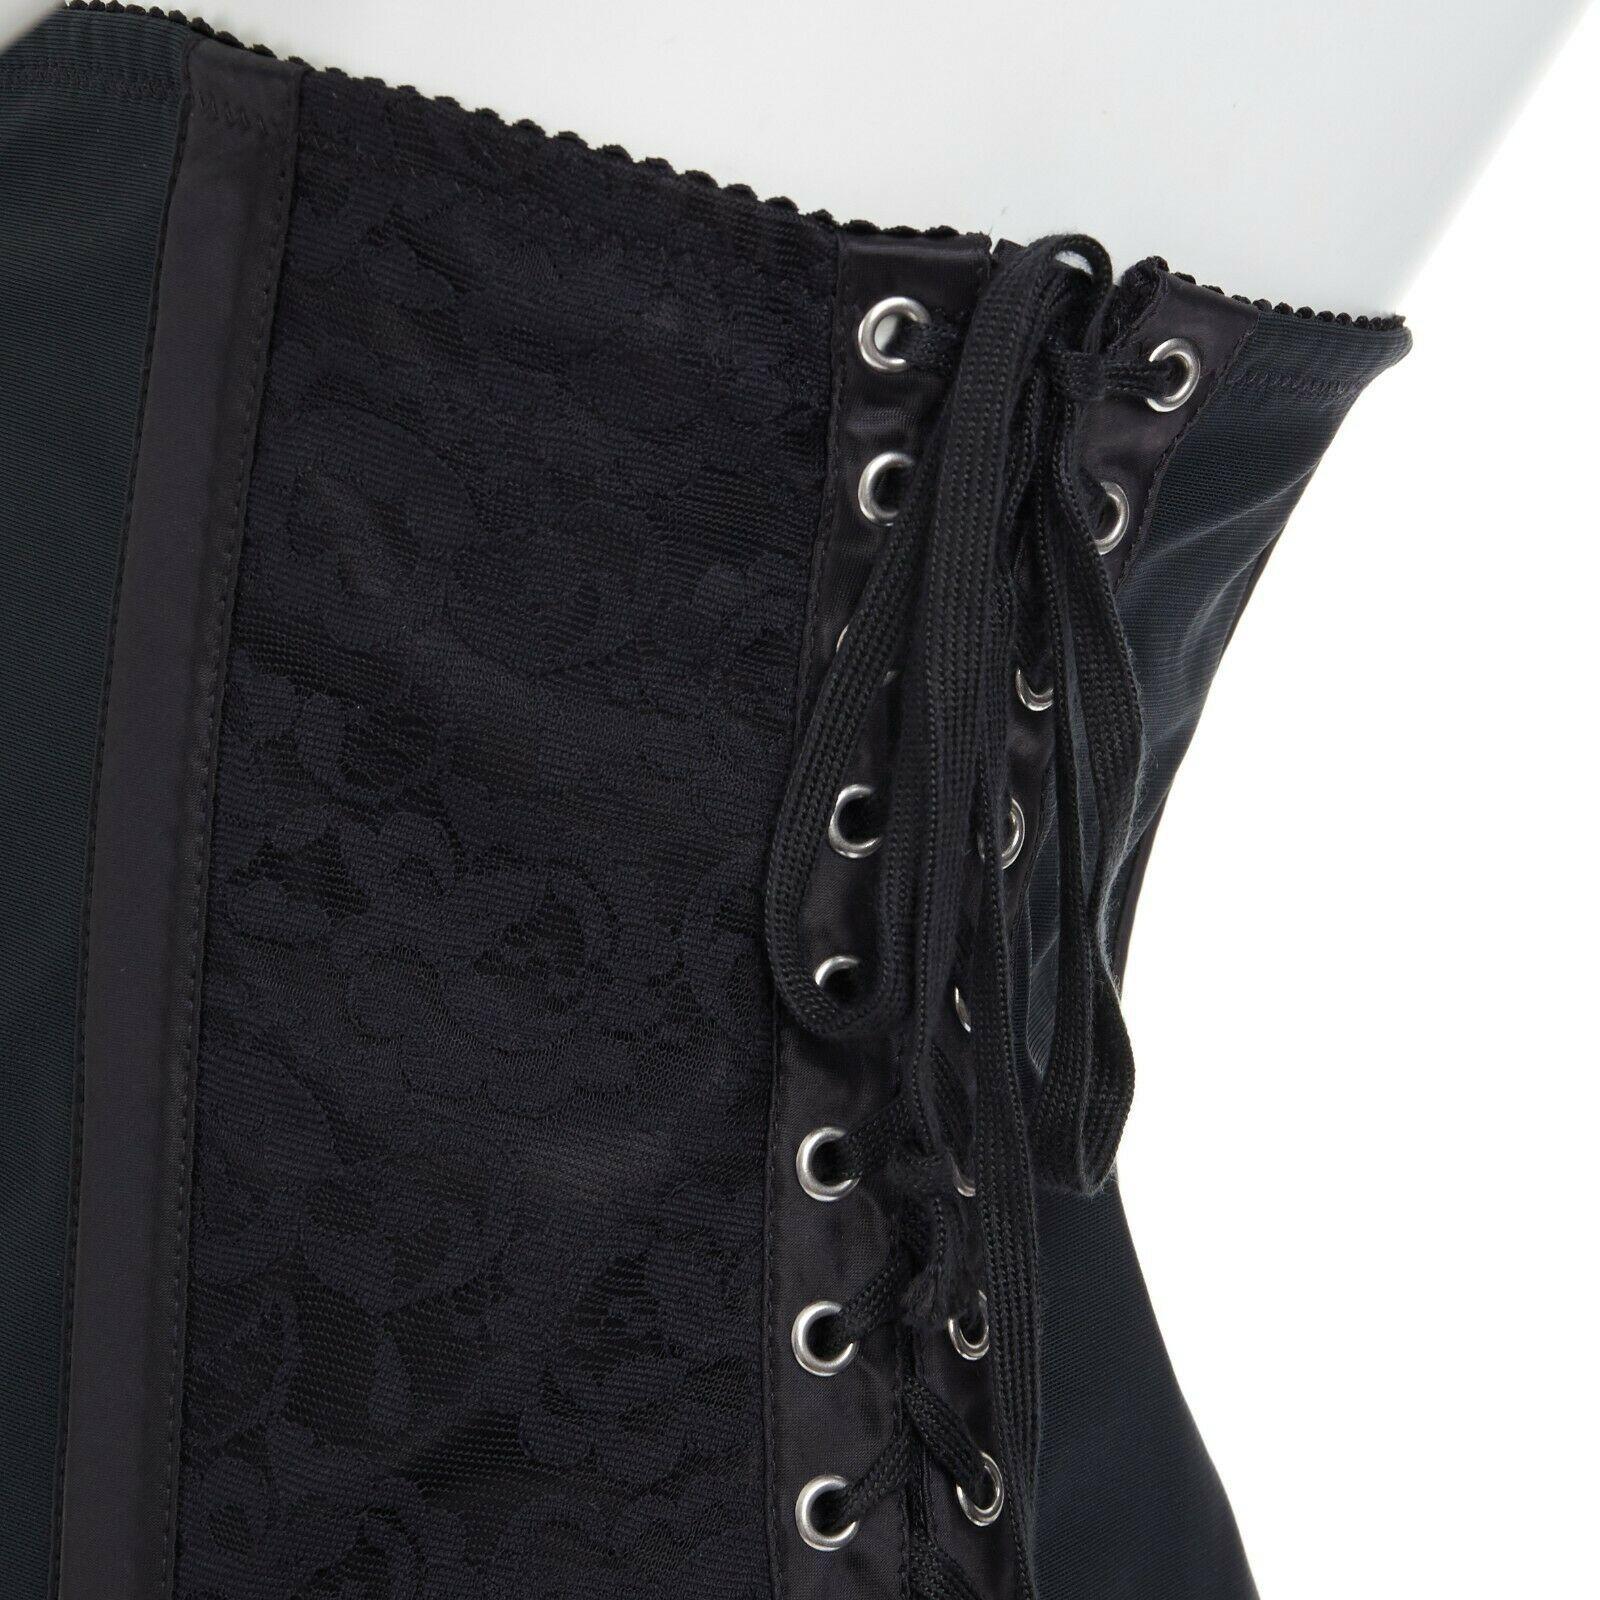 DOLCE GABBANA black floral lace boned laced up corset belt IT42 M
DOLCE & GABBANA
Black floral lace and mesh panel. Boned satin trimming. Velvet trimming. 
Hook and eye closure. Adjustable corset lace detail. Scalloped edges. 
Made in